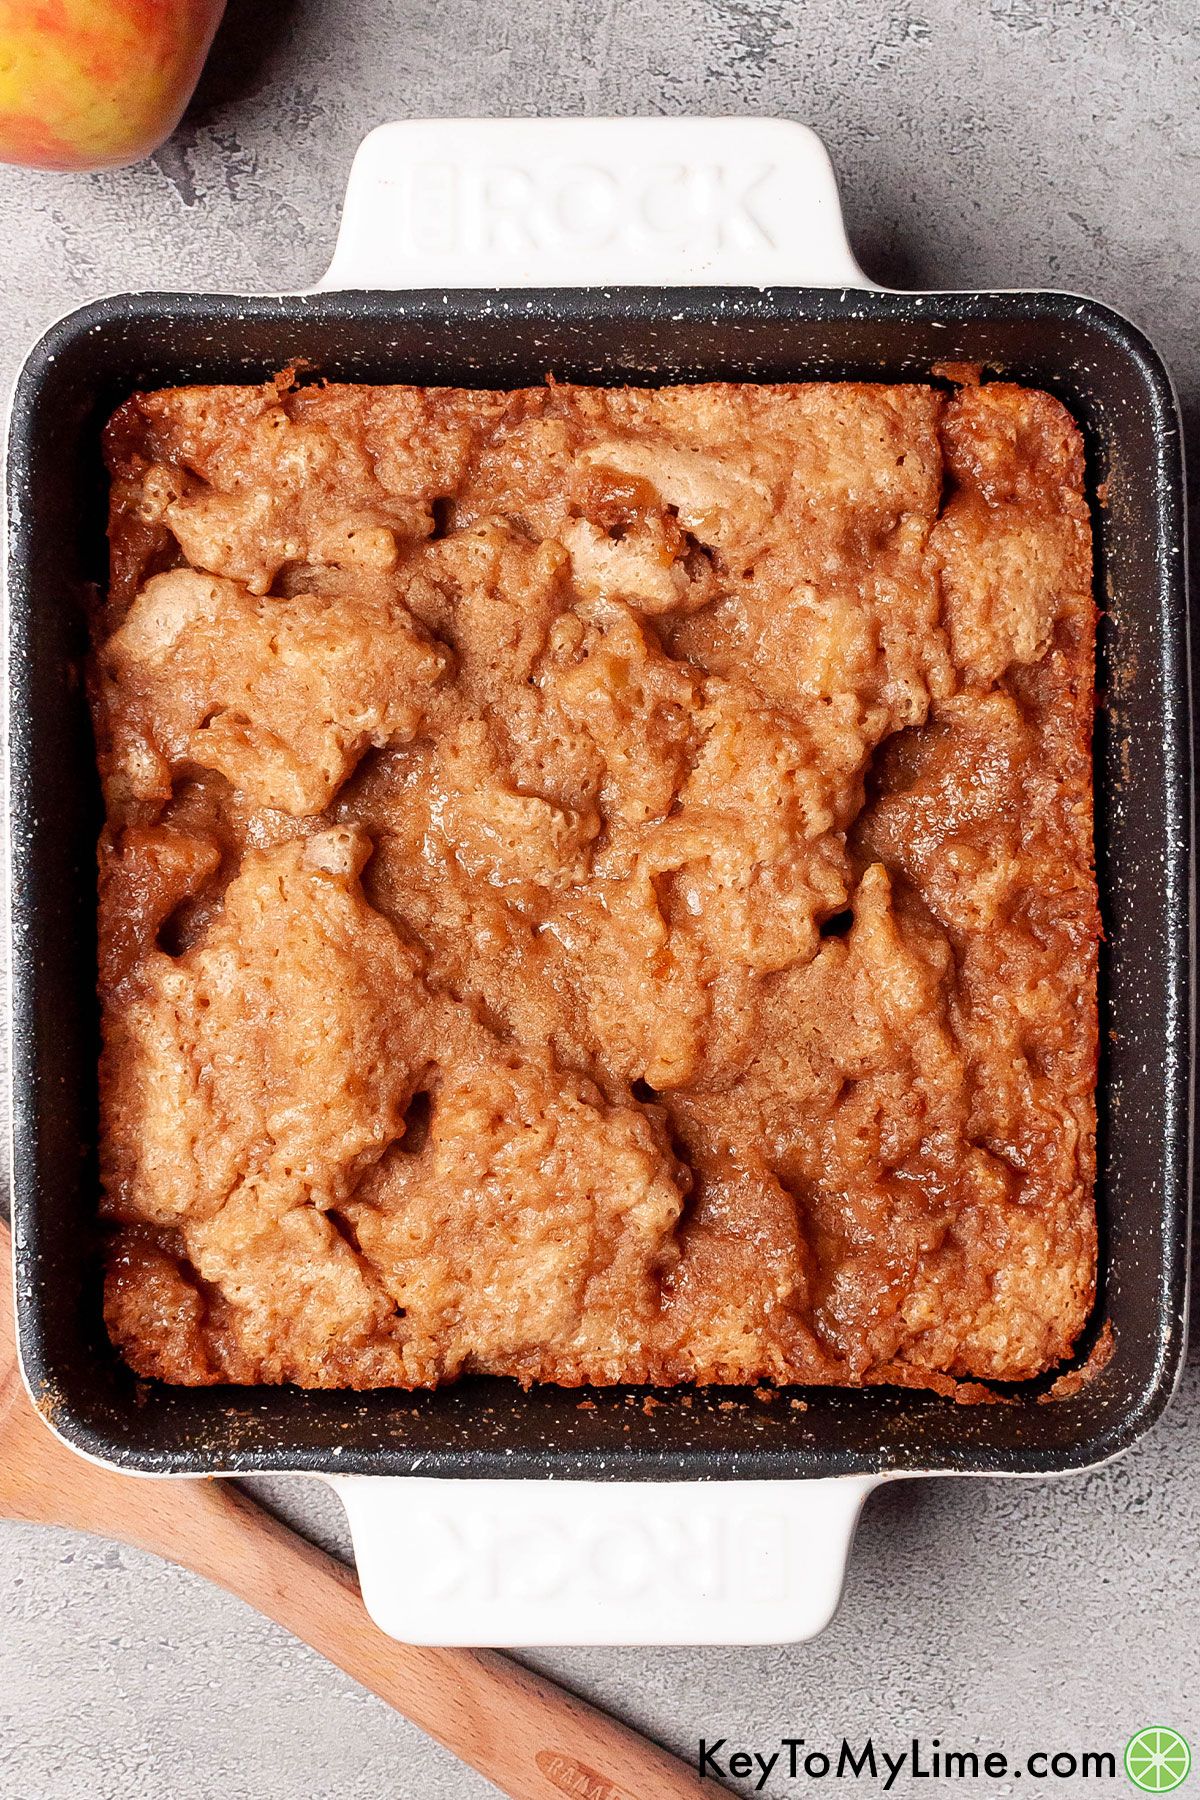 The best Bisquick coffee cake with cinnamon streusel topping.